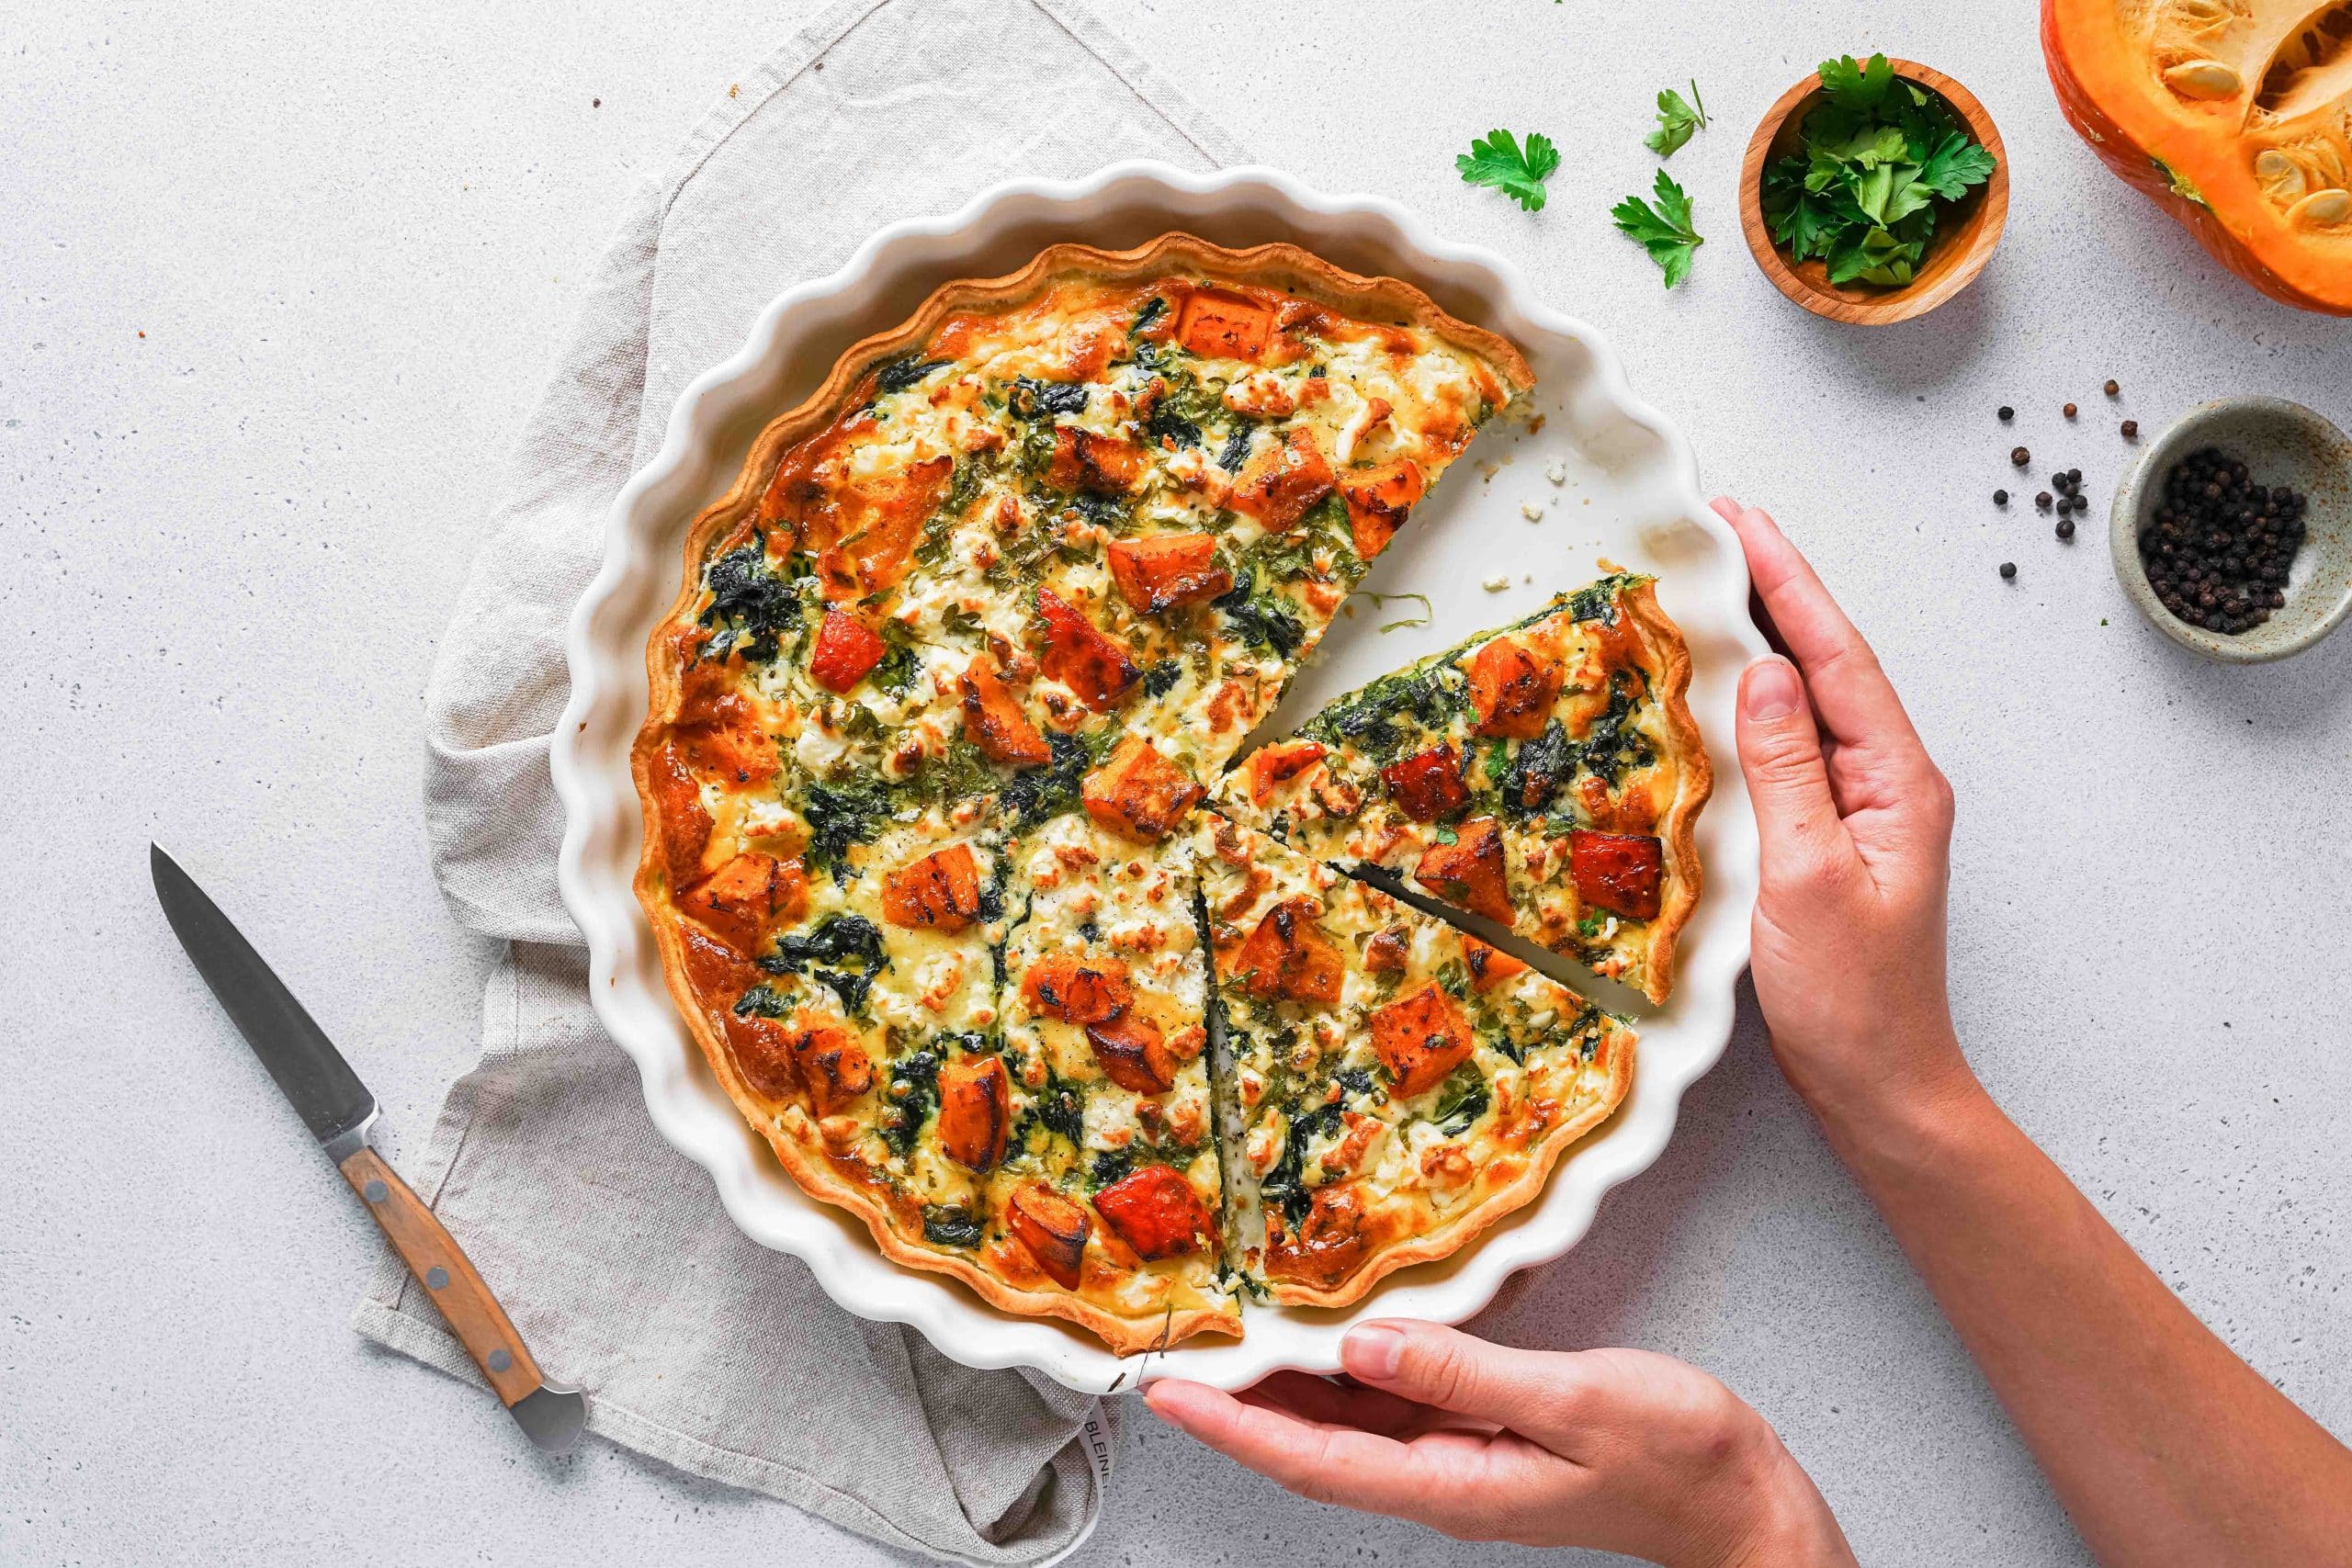 Roasted Pumpkin Quiche with Feta and Spinach